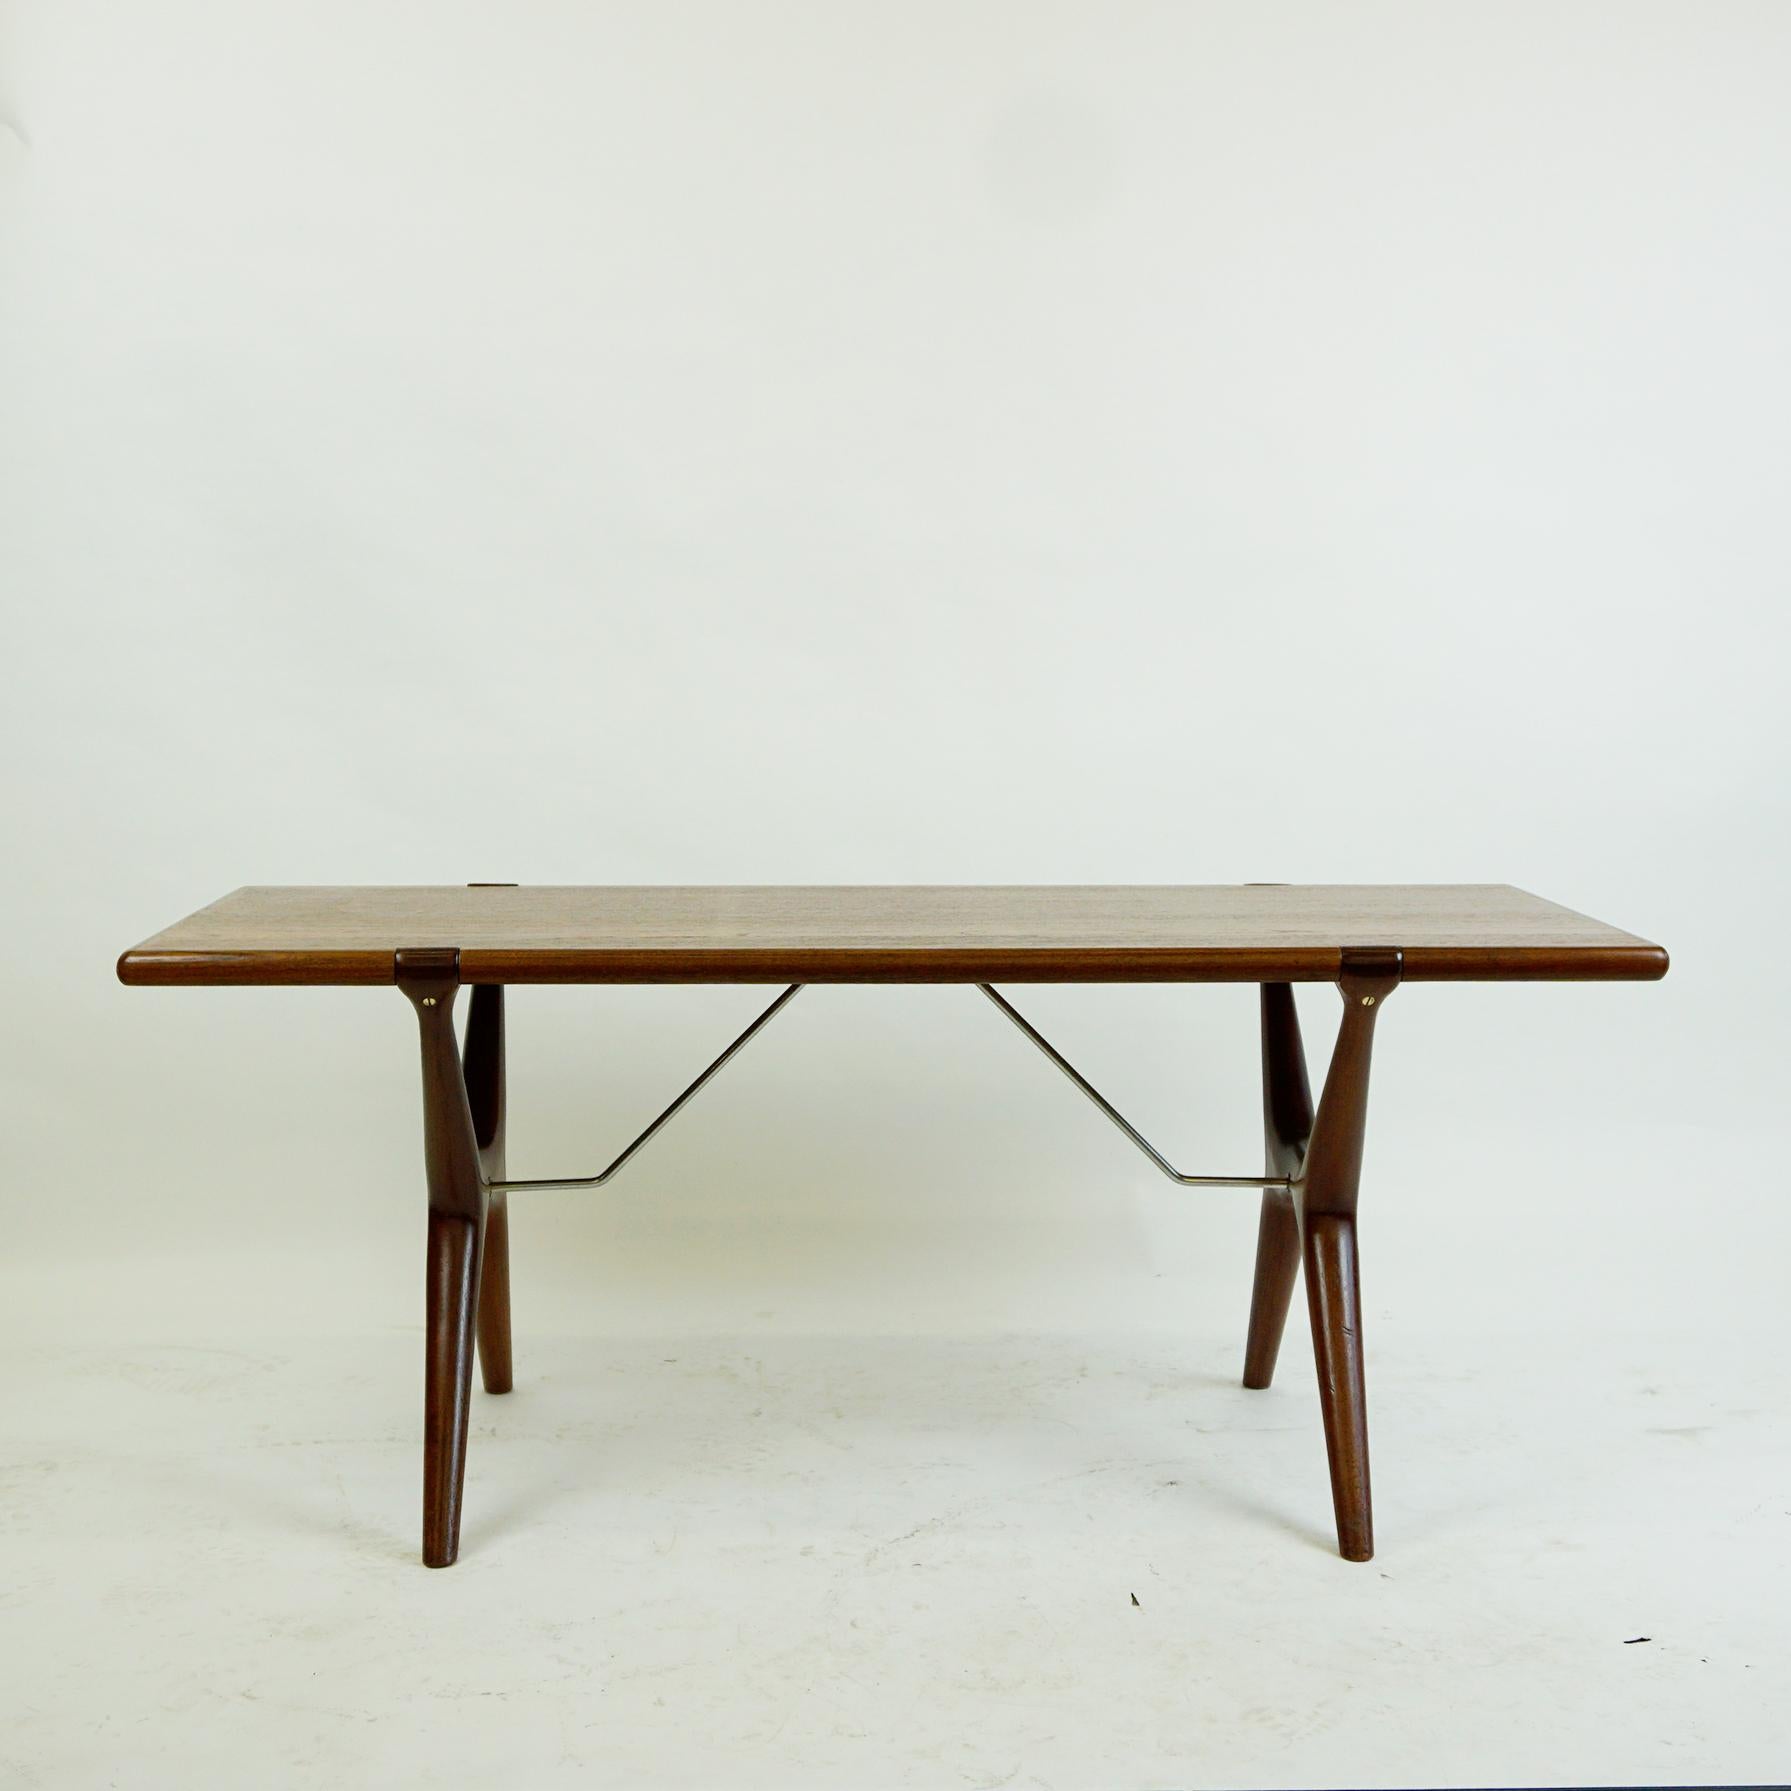 Excellent handcrafted teak coffee table designed in the 1960s by Carl Erik Ekselius for J.O.C. Vetlanda.
It features a teak veneered top with solid teak organic shaped X-base legs and metal stretchers.
A perfect highlight for any Scandinavian and